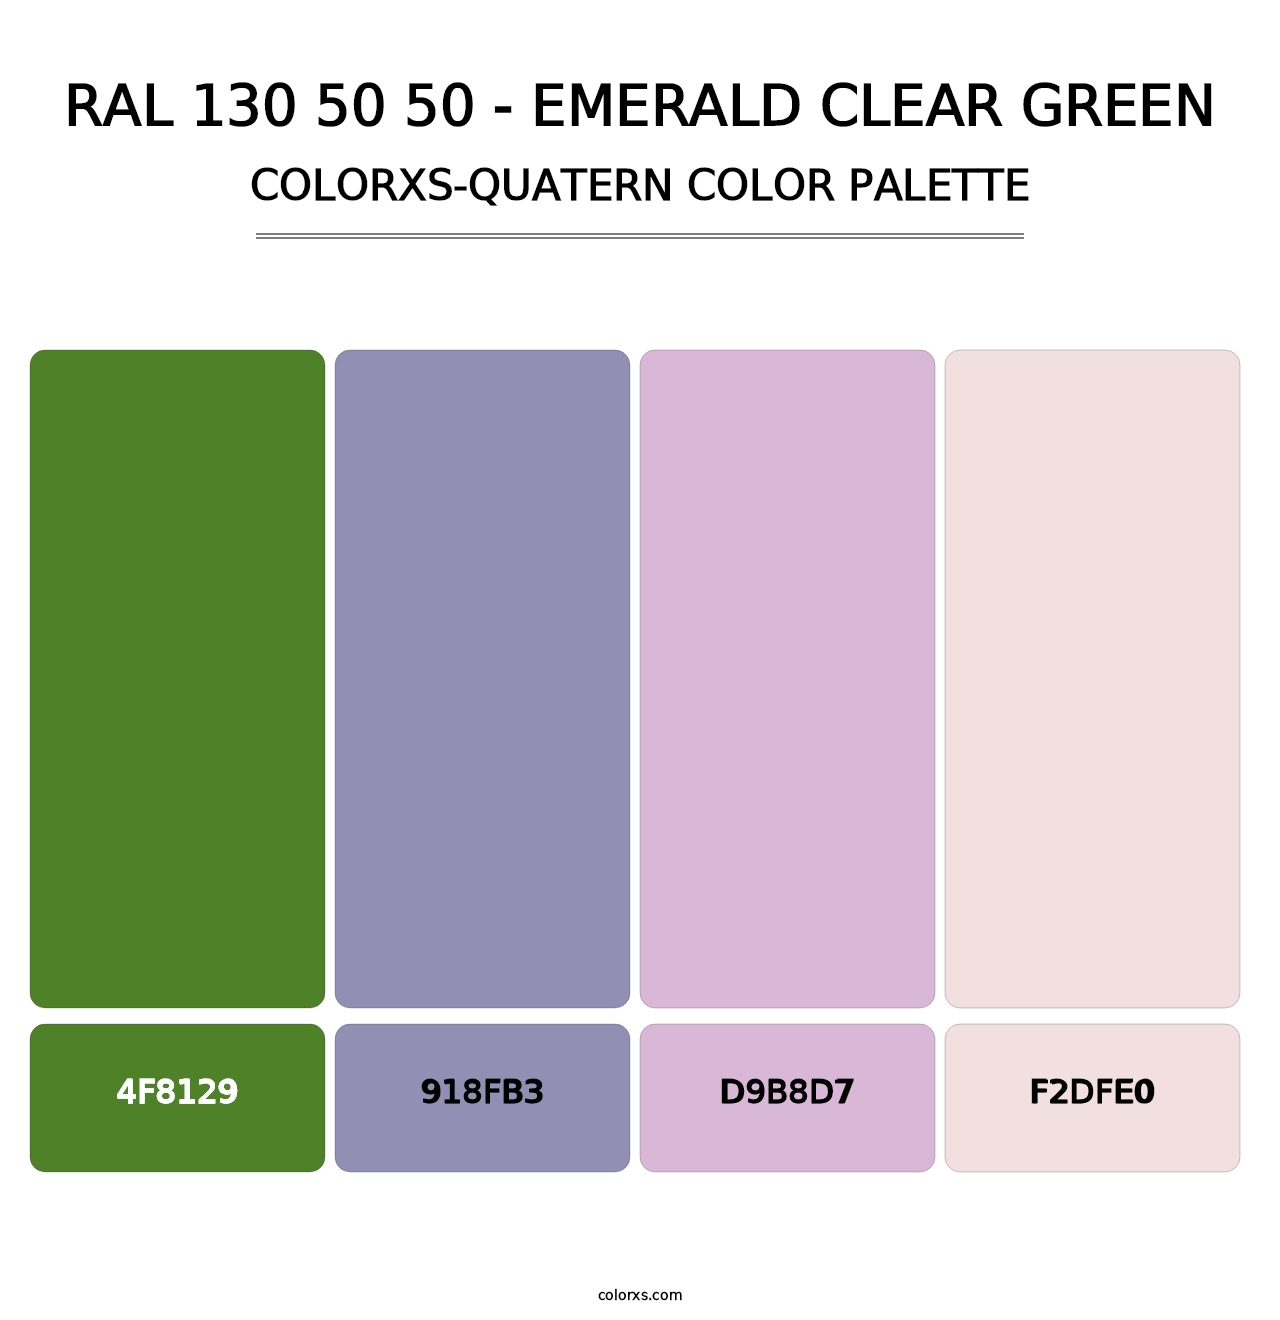 RAL 130 50 50 - Emerald Clear Green - Colorxs Quatern Palette